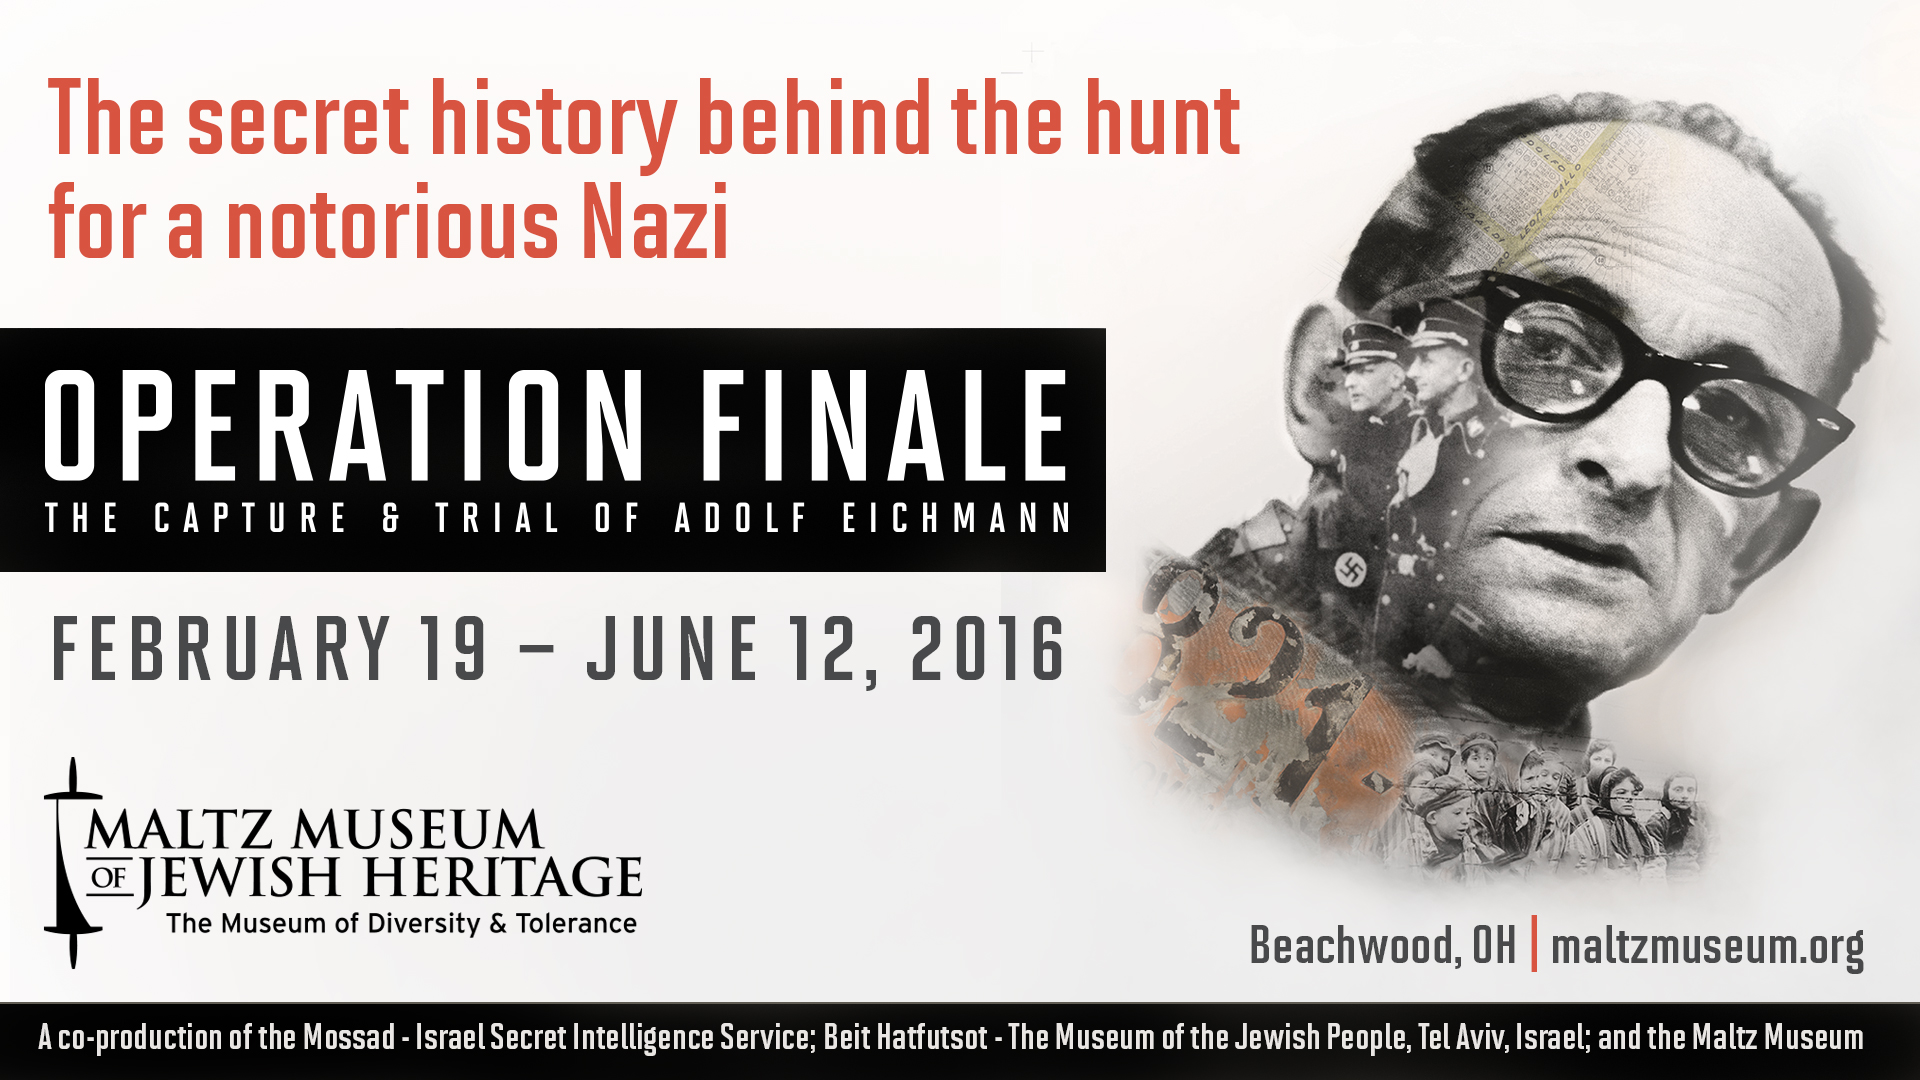 Operation Finale: The Capture & Trial of Adolf Eichmann